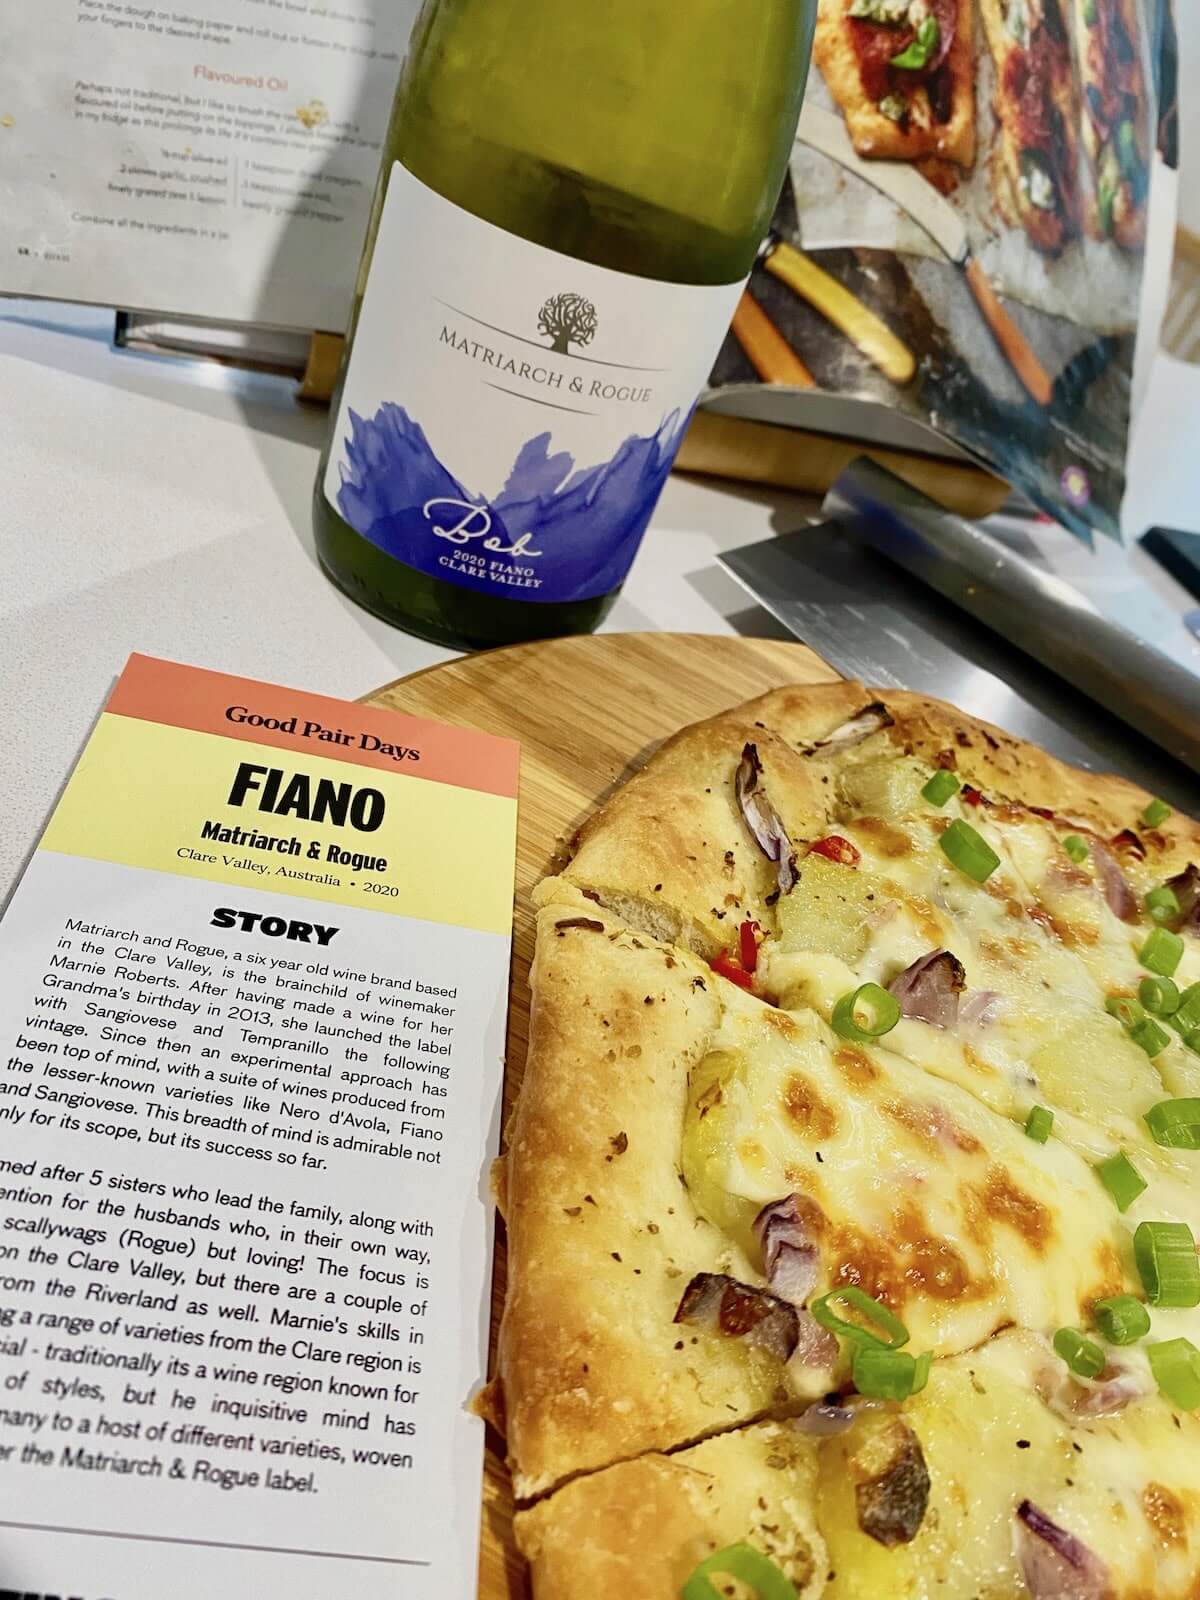 Matriarch and Rogue Fiano 2020 - Good Pair Days tasting card and pizza